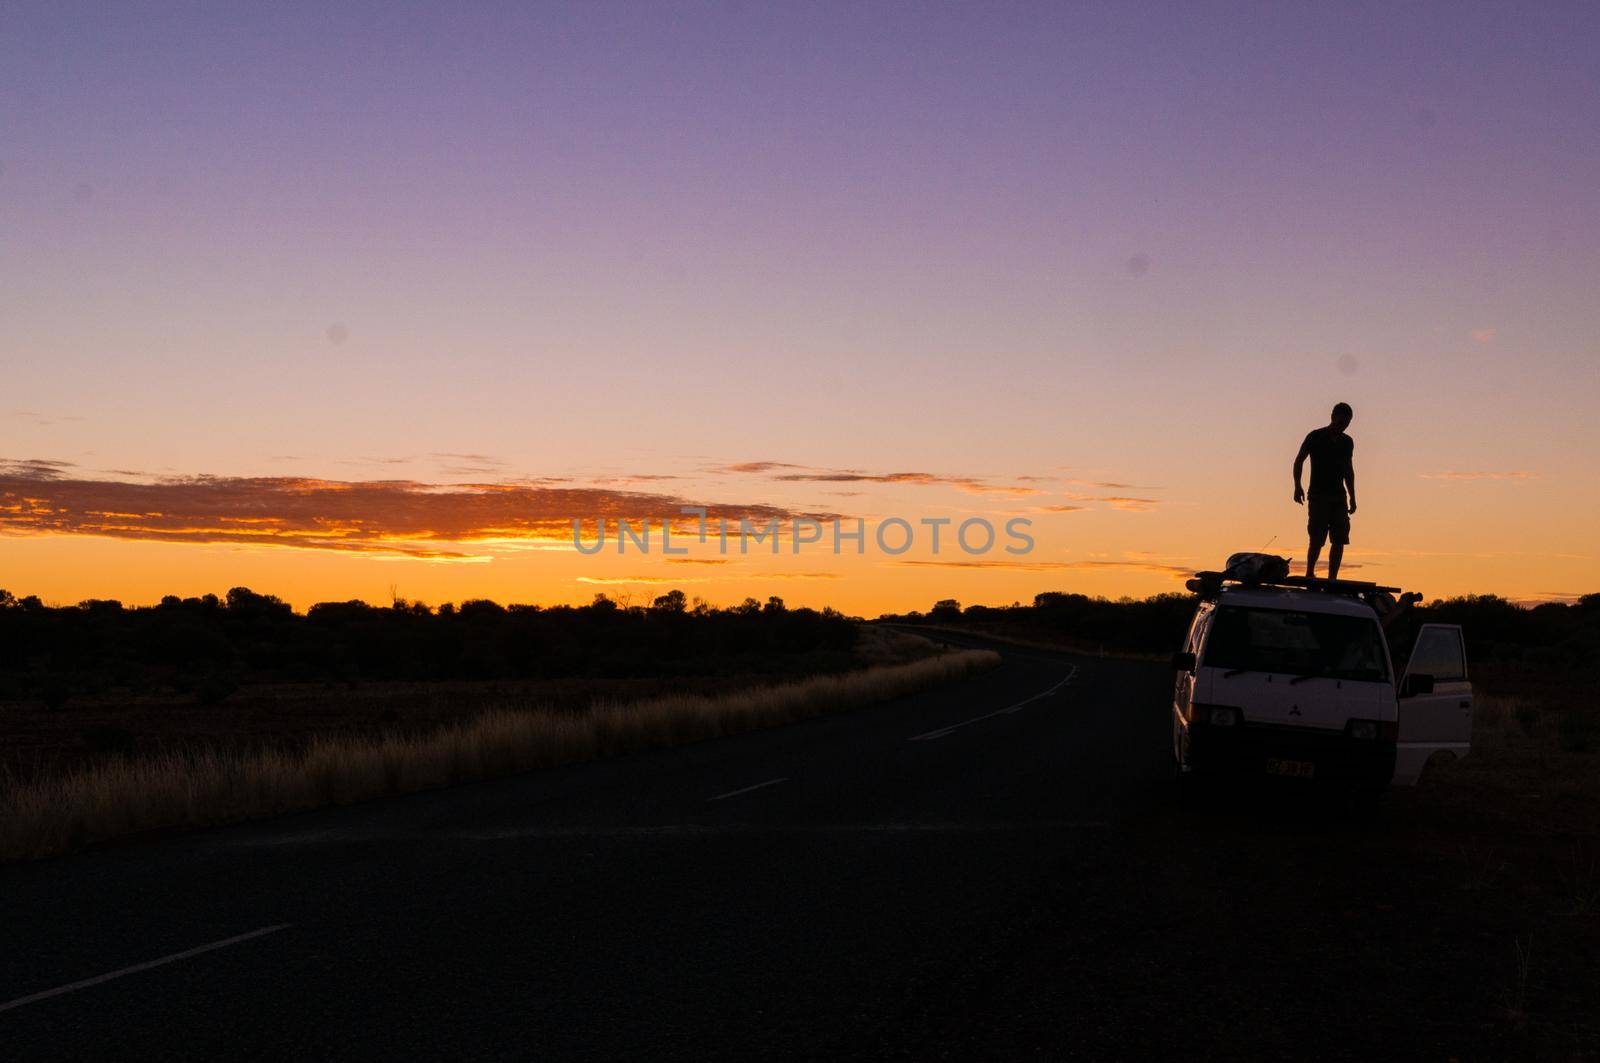 young man standing on car while a nice Sunset in the Outback of Australia, northern terrotory by bettercallcurry